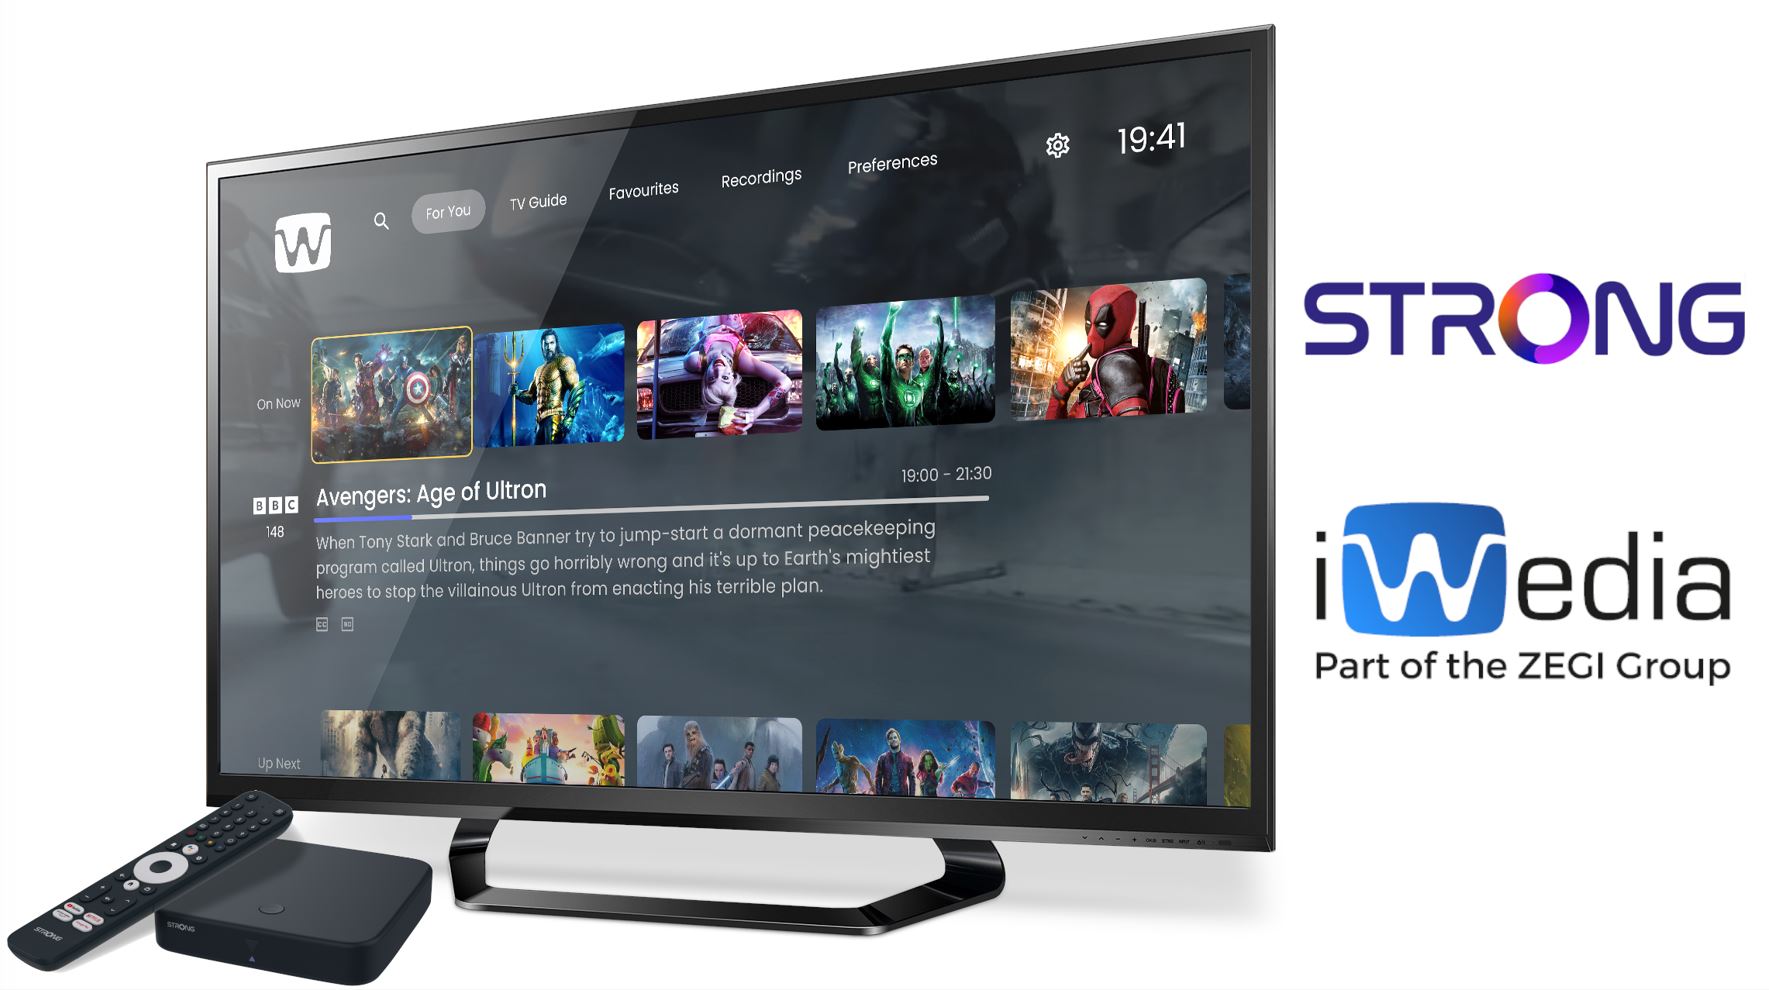 iWedia and Skyworth Partnership: Delivering enhanced user experience with premium Live TV app